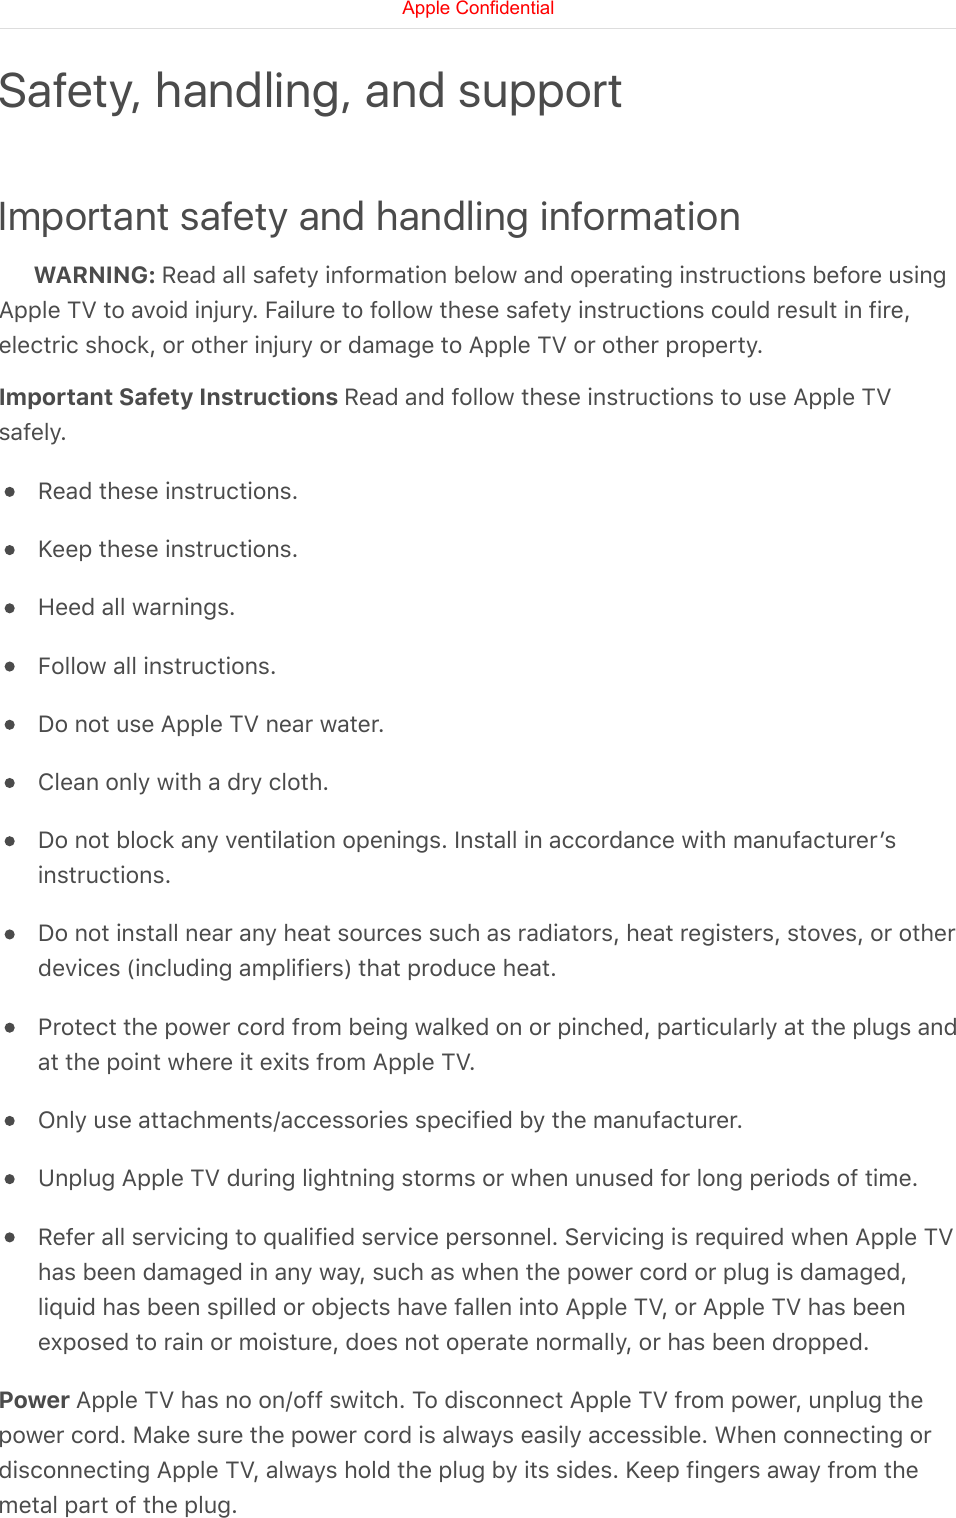 Important safety and handling informationWARNING: Read all safety information below and operating instructions before usingApple TV to avoid injury. Failure to follow these safety instructions could result in fire,electric shock, or other injury or damage to Apple TV or other property.Important Safety Instructions Read and follow these instructions to use Apple TVsafely.Read these instructions.Keep these instructions.Heed all warnings.Follow all instructions.Do not use Apple TV near water.Clean only with a dry cloth.Do not block any ventilation openings. Install in accordance with manufacturerʼsinstructions.Do not install near any heat sources such as radiators, heat registers, stoves, or otherdevices (including amplifiers) that produce heat.Protect the power cord from being walked on or pinched, particularly at the plugs andat the point where it exits from Apple TV.Only use attachments/accessories specified by the manufacturer.Unplug Apple TV during lightning storms or when unused for long periods of time.Refer all servicing to qualified service personnel. Servicing is required when Apple TVhas been damaged in any way, such as when the power cord or plug is damaged,liquid has been spilled or objects have fallen into Apple TV, or Apple TV has beenexposed to rain or moisture, does not operate normally, or has been dropped.Power Apple TV has no on/off switch. To disconnect Apple TV from power, unplug thepower cord. Make sure the power cord is always easily accessible. When connecting ordisconnecting Apple TV, always hold the plug by its sides. Keep fingers away from themetal part of the plug.Safety, handling, and supportApple Confidential